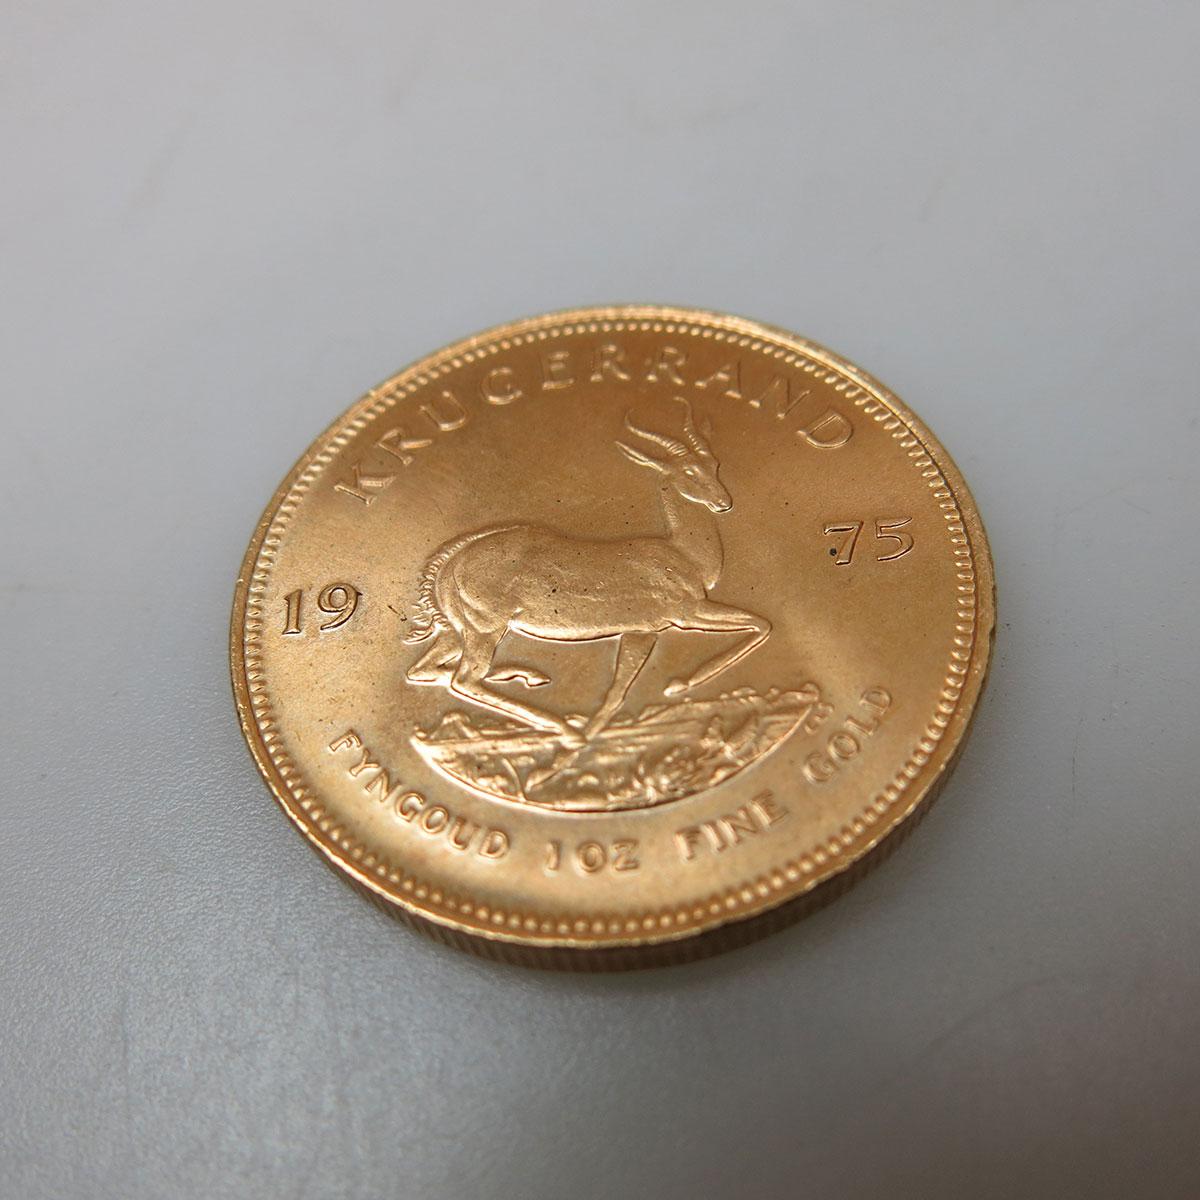 South African 1975 Krugerrand Gold Coin